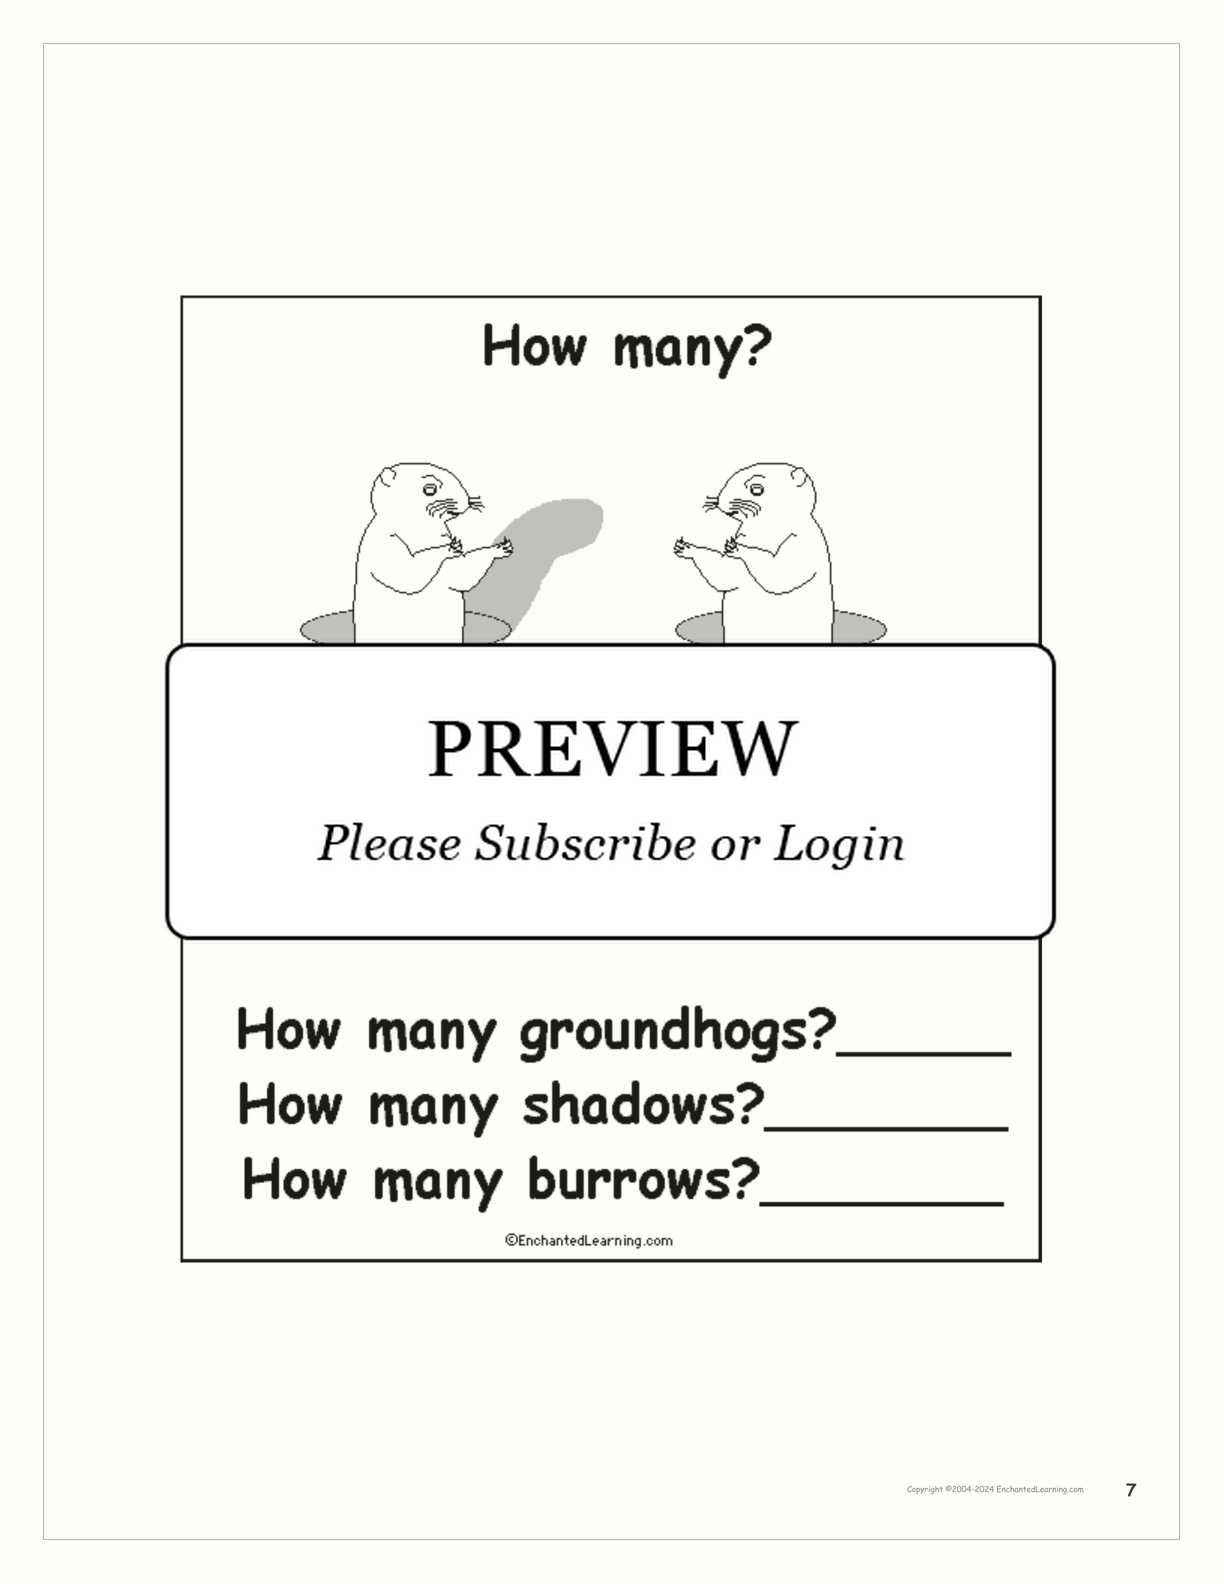 'Groundhog Day: How Many?' interactive worksheet page 7